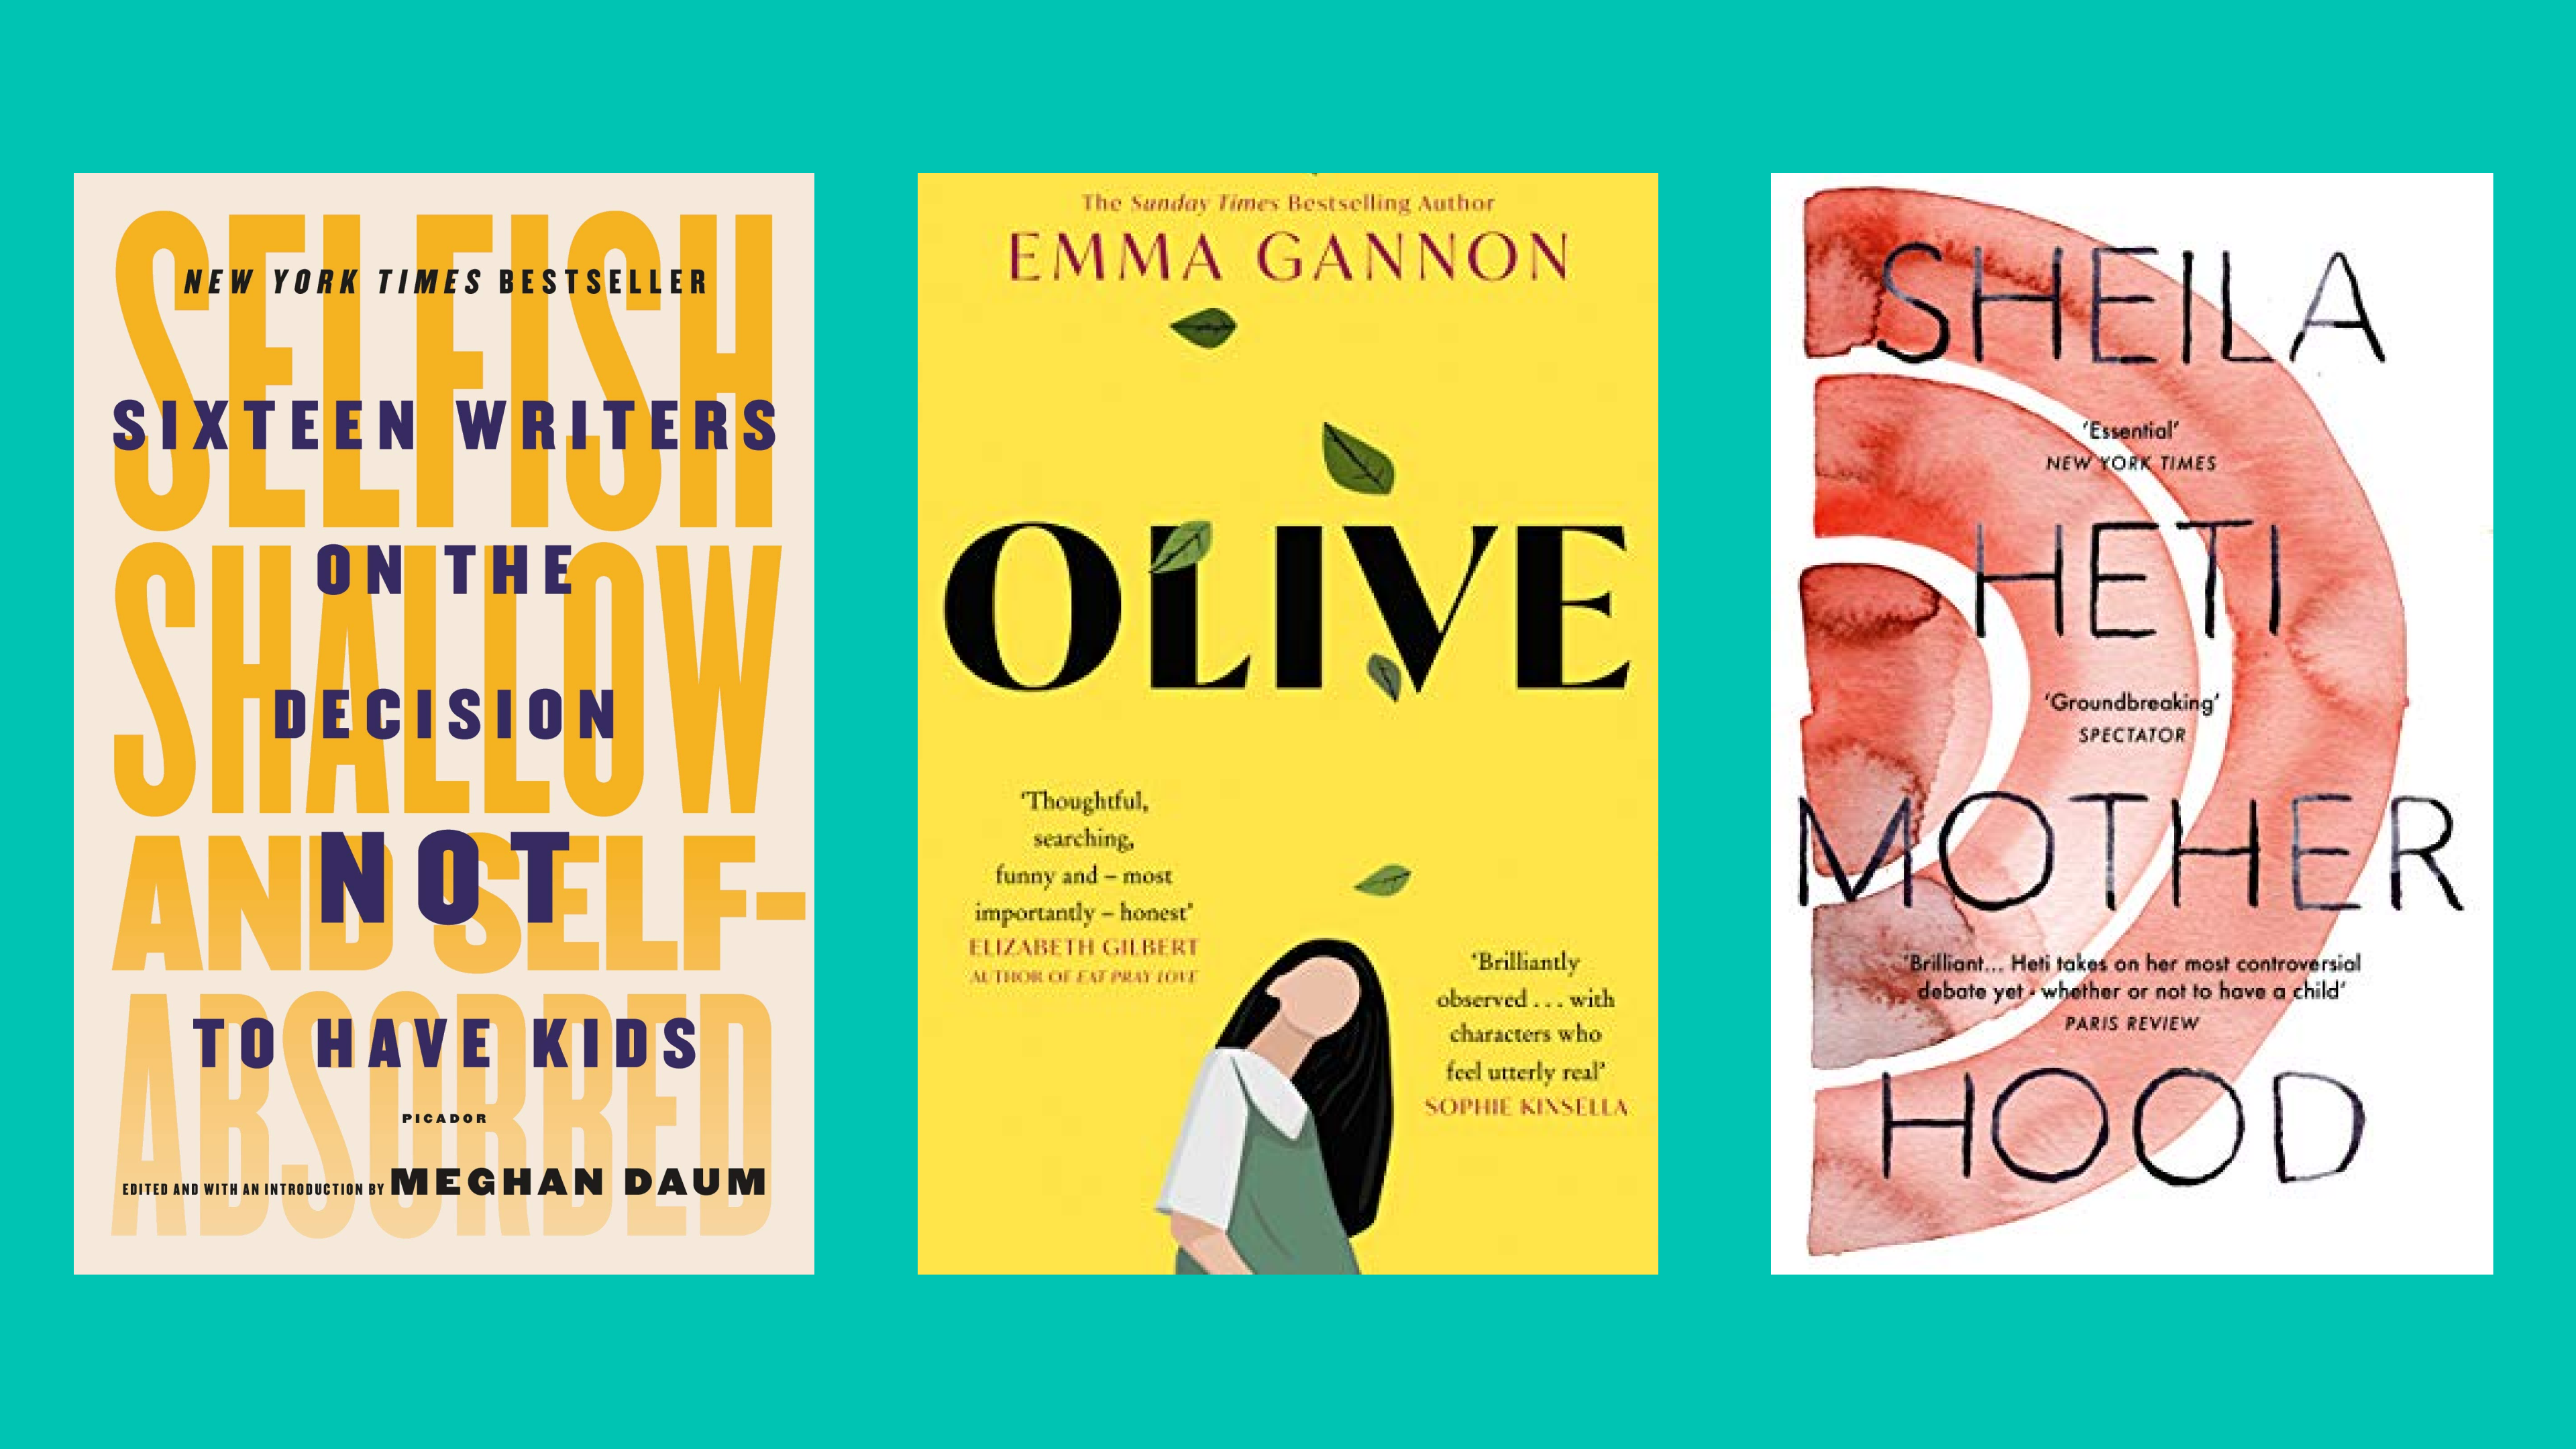 Book covers for "Sixteen Writers on the Decision to Not Have Kids," "Olive," and "Motherhood."